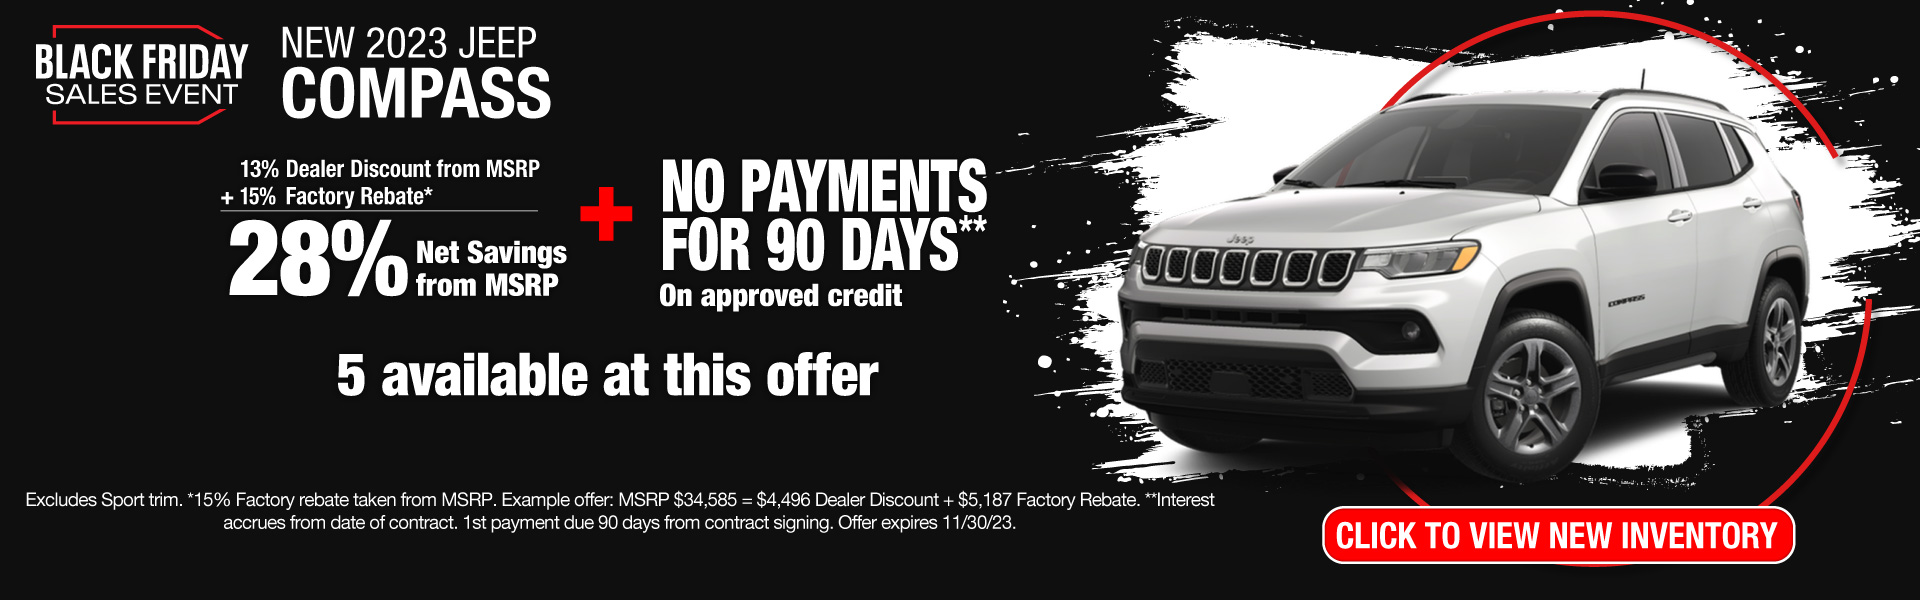 Get a New 2023 Jeep Compass for 28% Net Savings from MSRP PLUS No Payments for 90 Days! Offer expires 11/30/23.